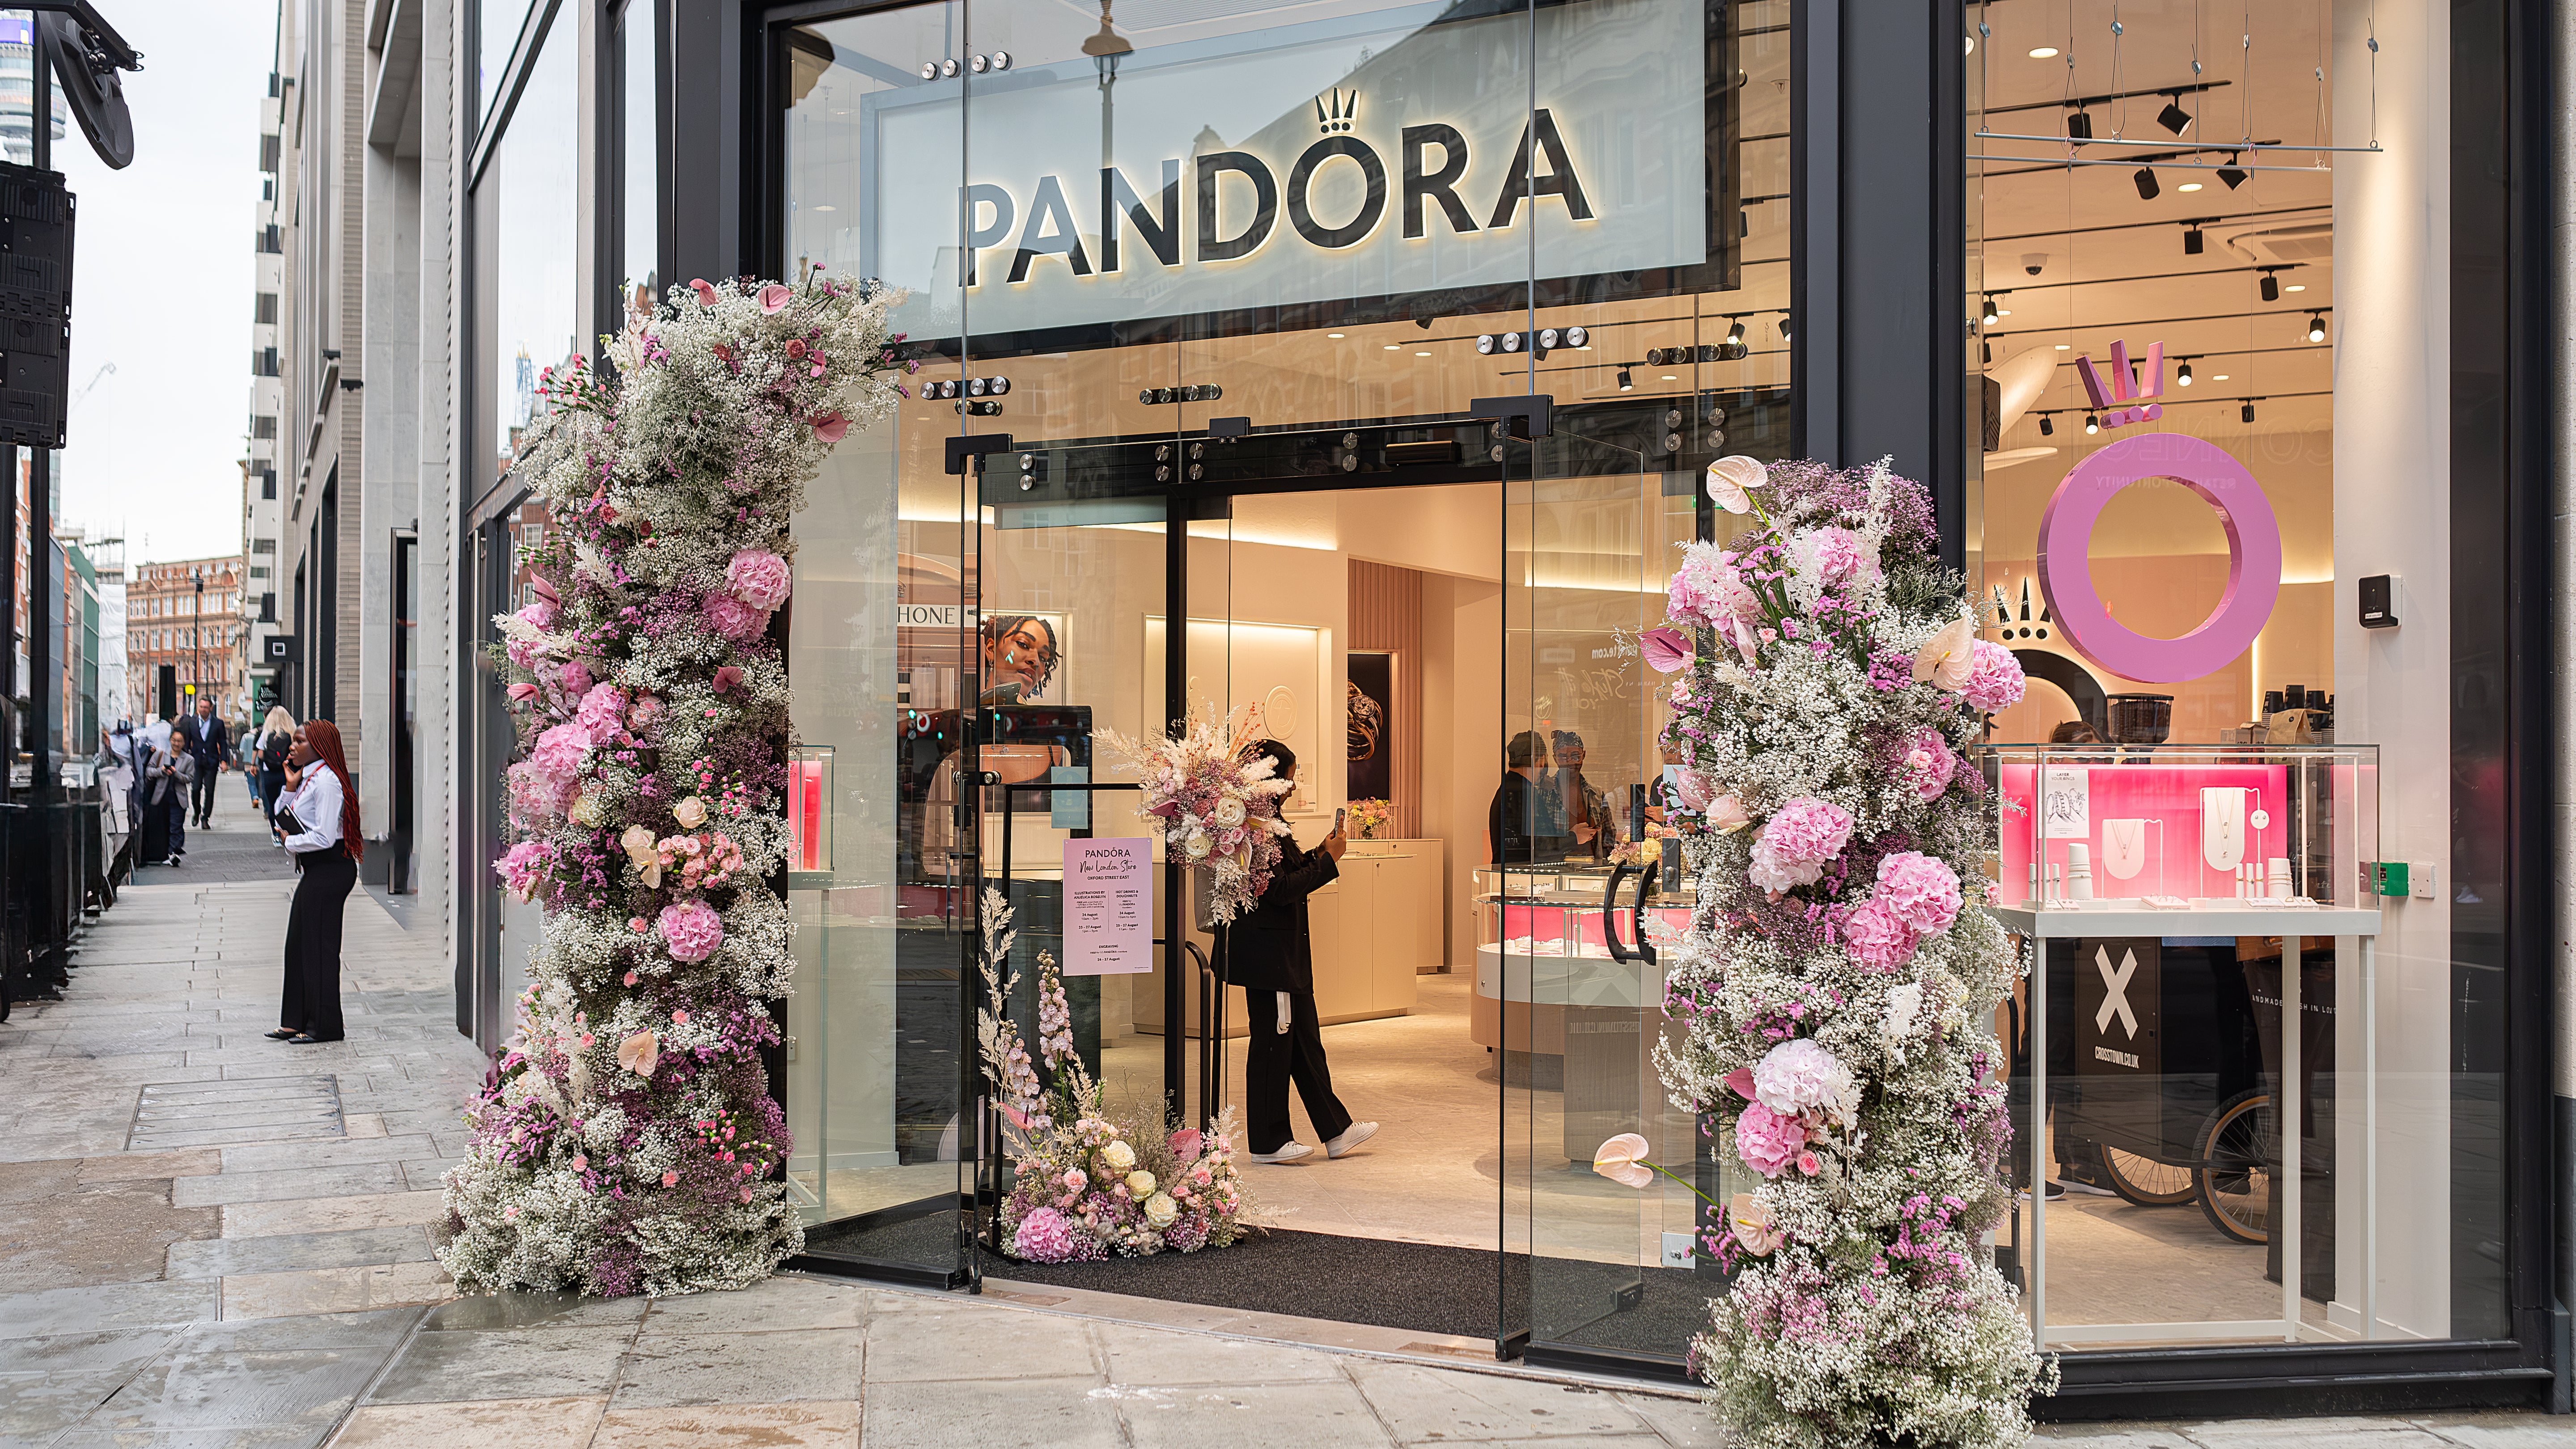 Amaranté created stunning floral entrance features for Pandora's store opening, skilfully combining an array of beautiful flowers with subtle pink accents, flawlessly embodying Pandora's brand essence.